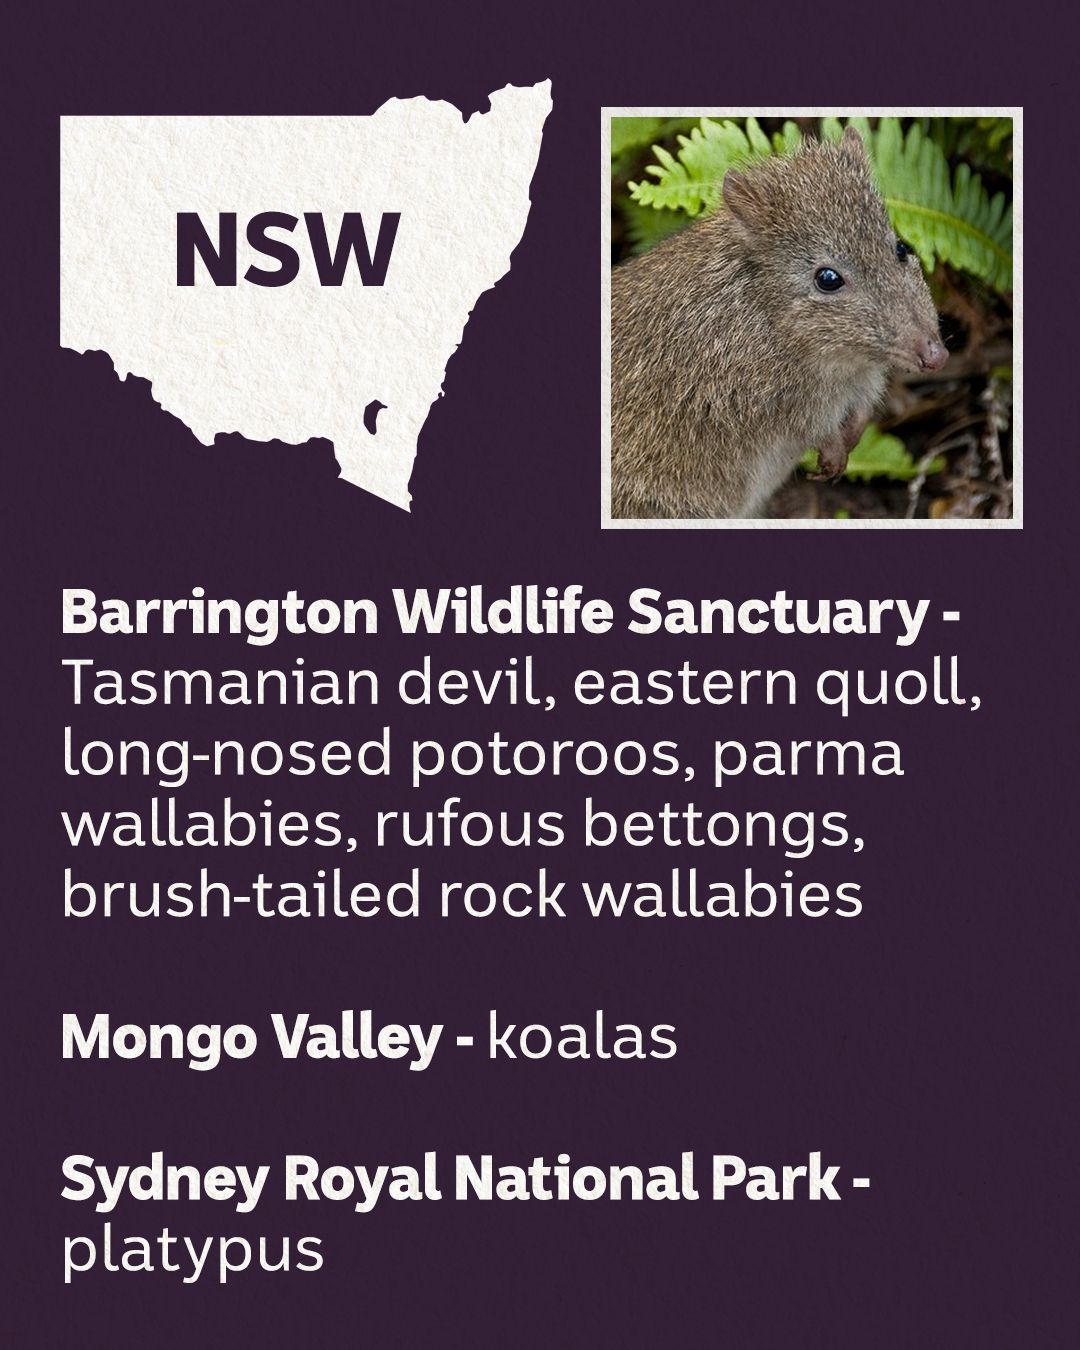 Some of the rewilding projects in NSW.